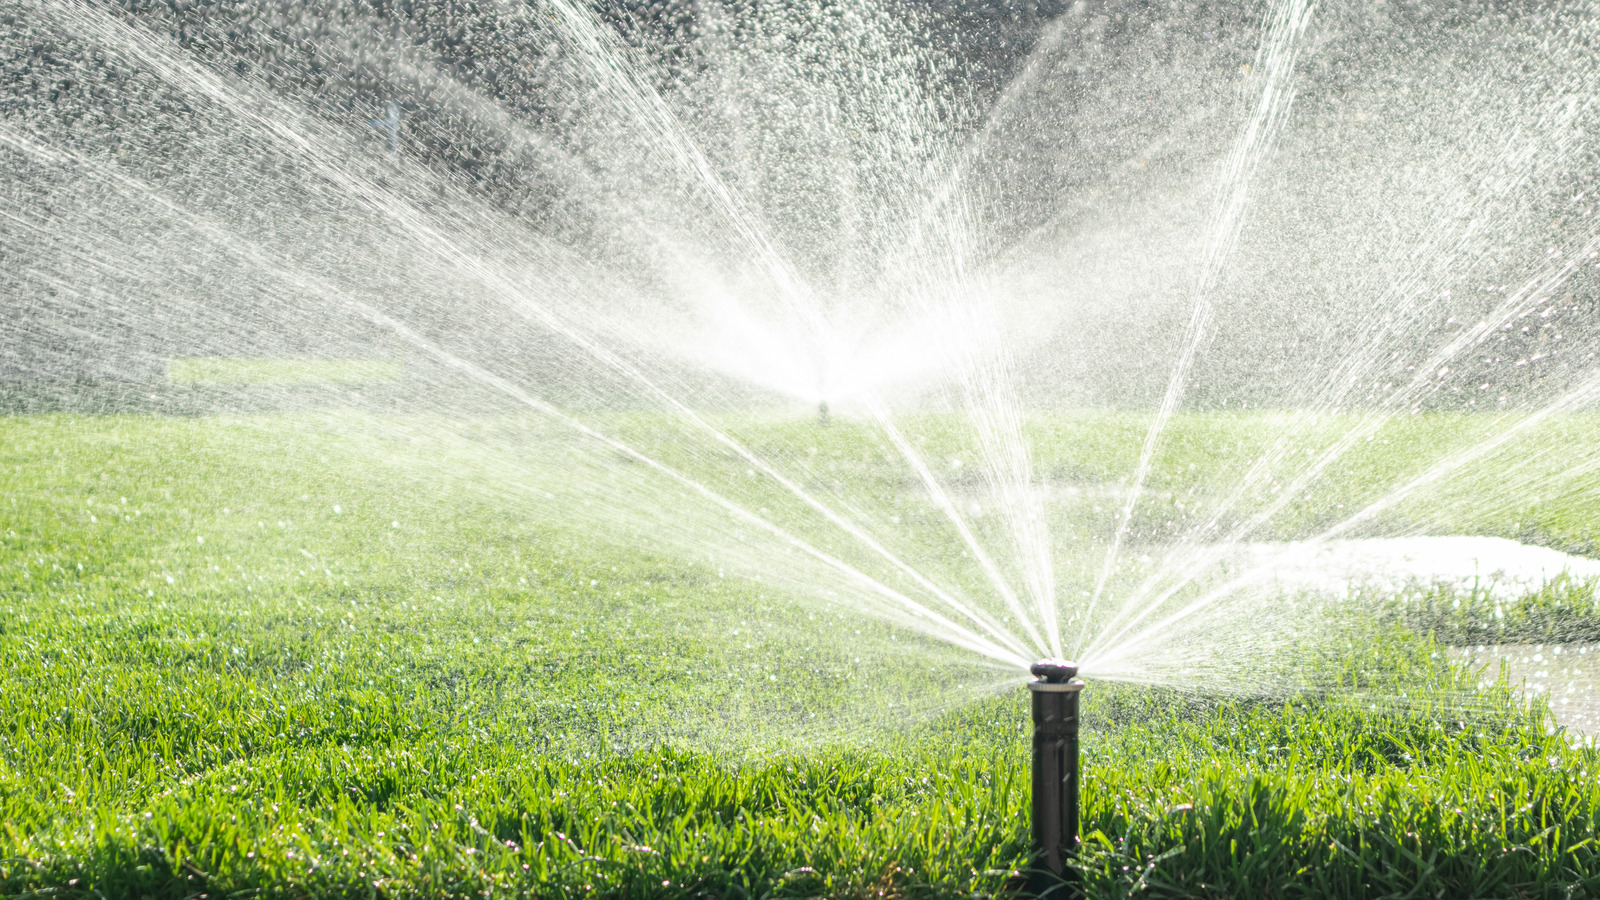 Sprinkler Vs. Hose: Which Is More Cost Effective For Your Lawn?